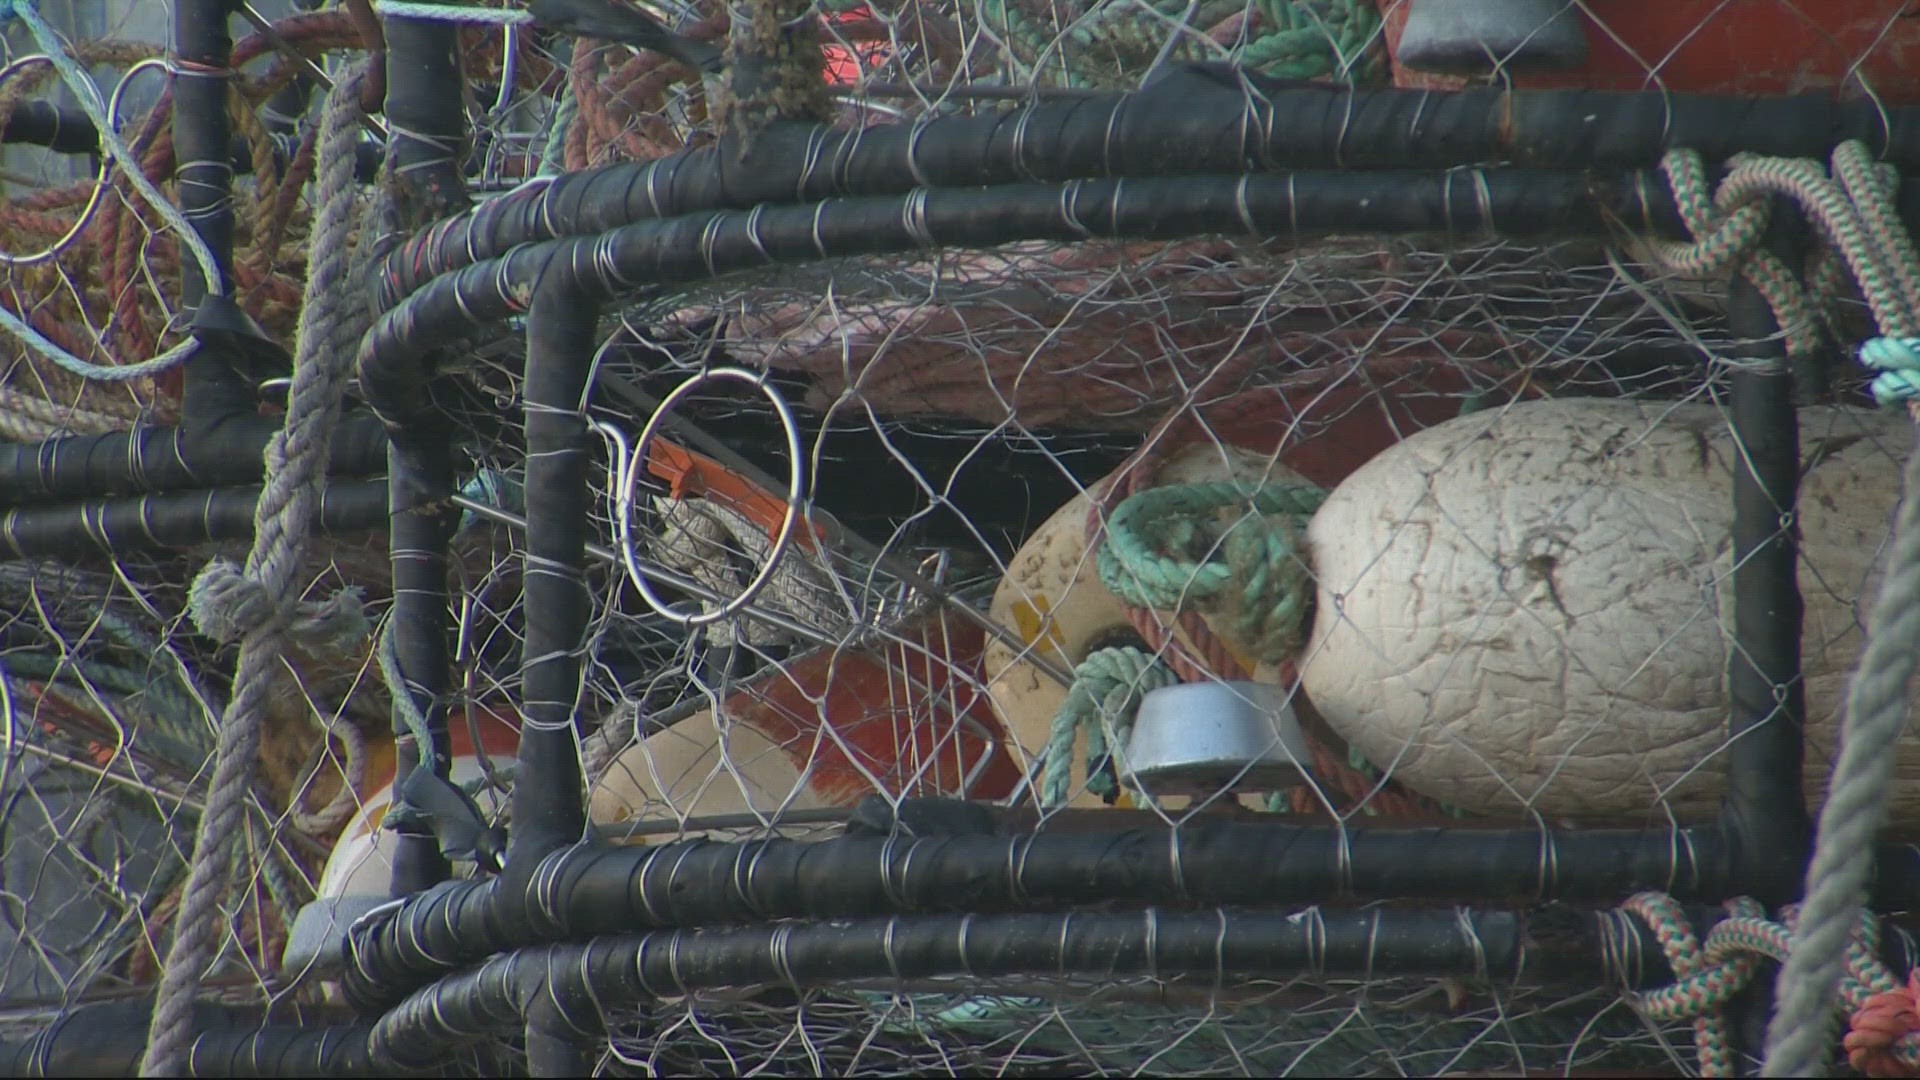 The season usually starts Dec. 1, but is often delayed. Only areas south of Depoe Bay are open for crabbing so far.